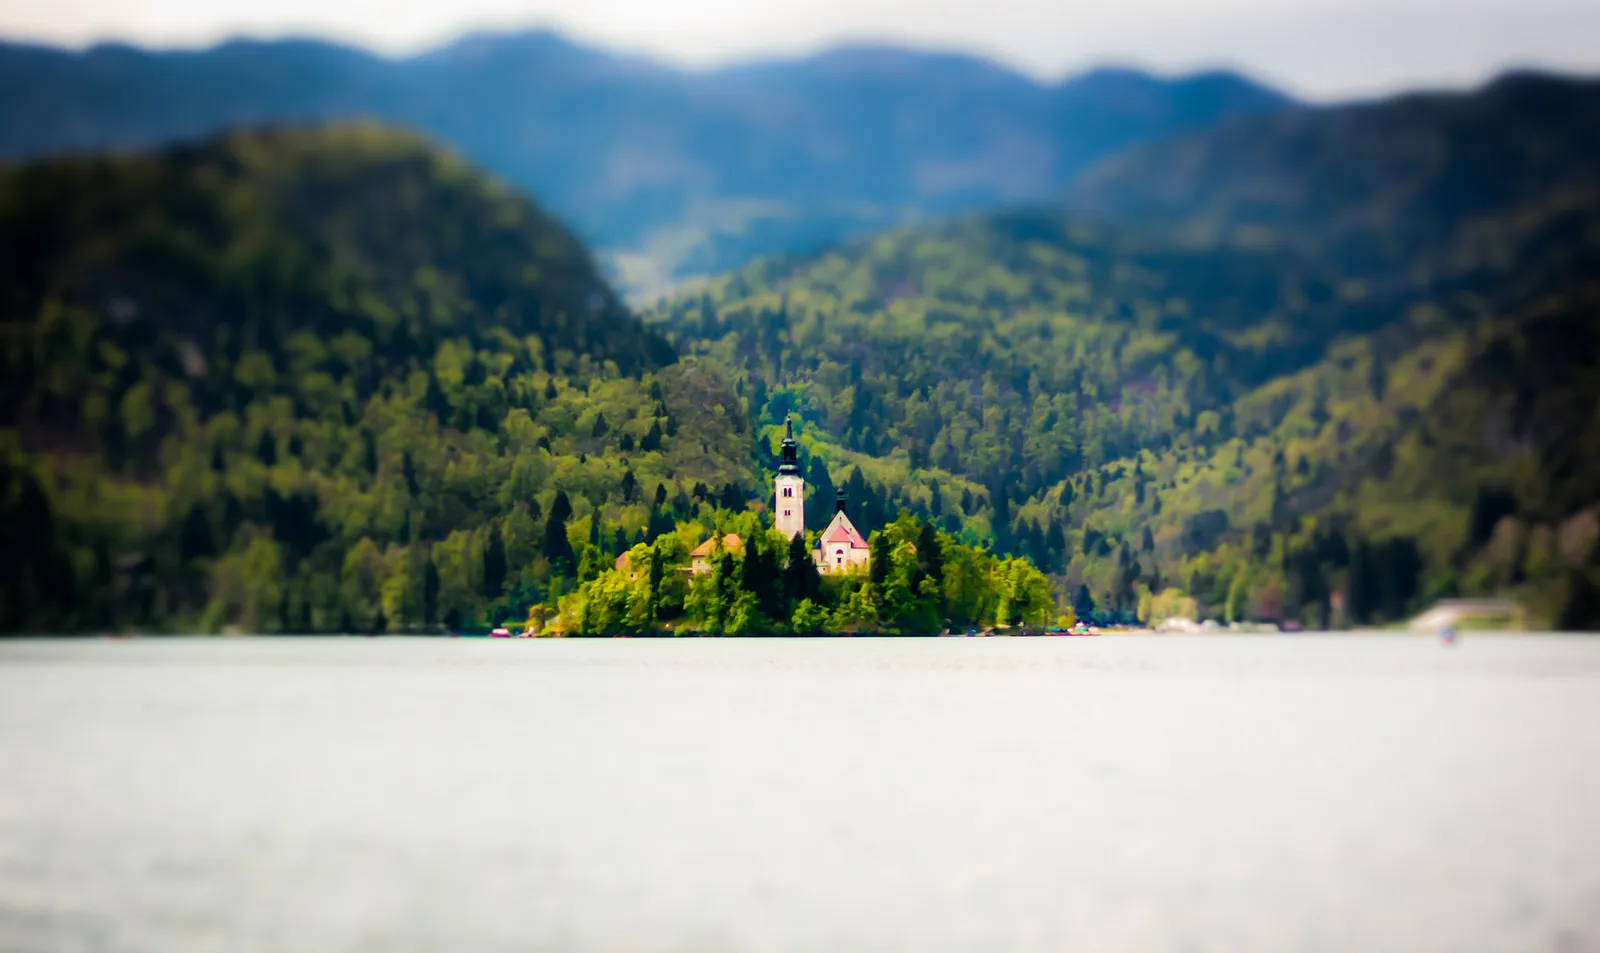 An artistic view of lake Bled with its church